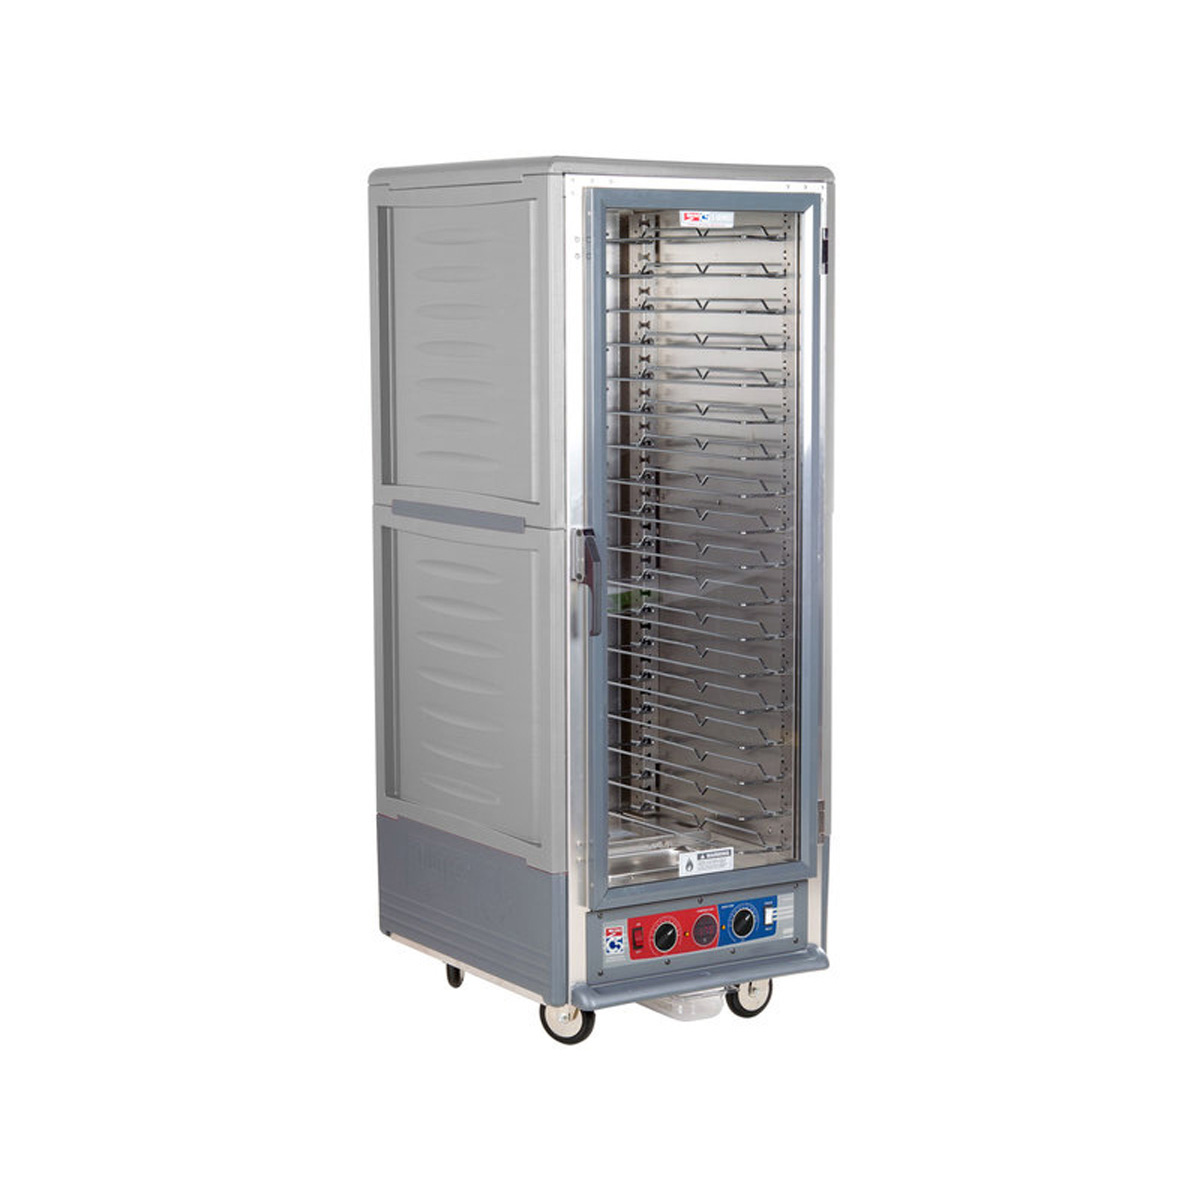 Metro C539-CFC-U-GYA C5 3 Series Mobile Heated Proofing and Holding Cabinet